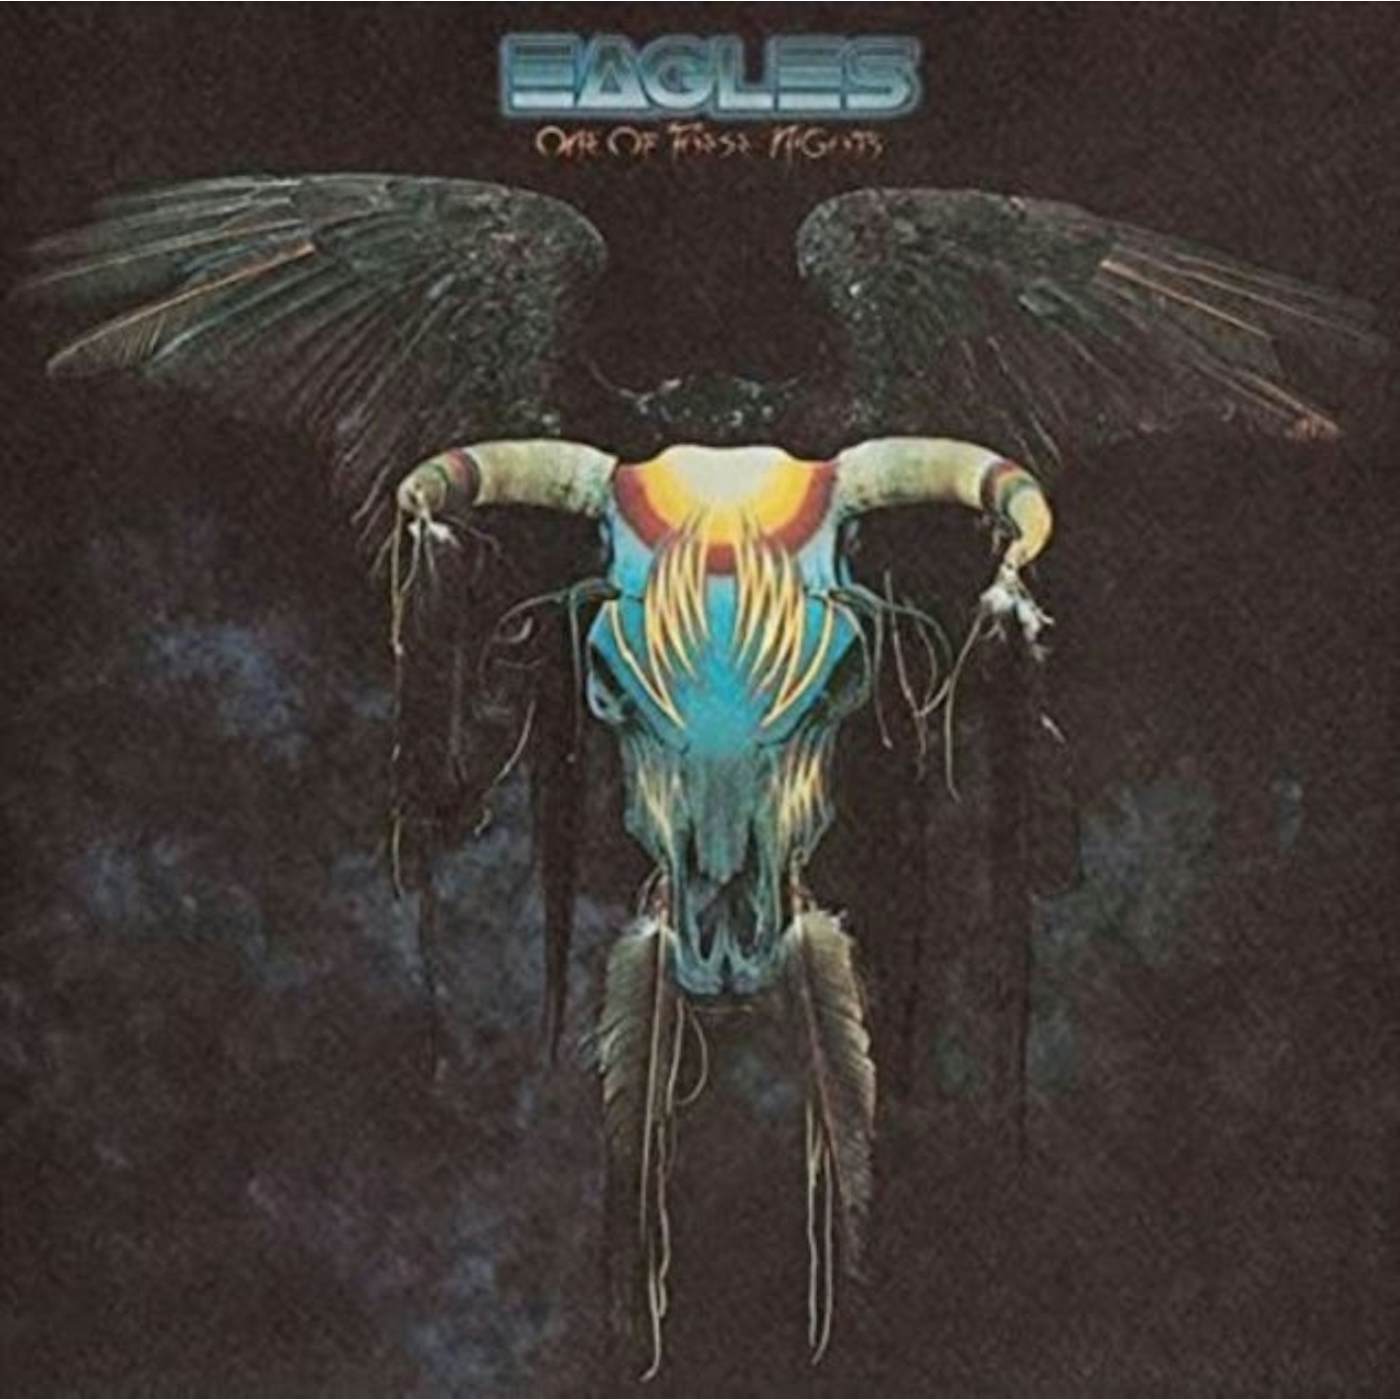 Eagles LP Vinyl Record - One Of These Nights